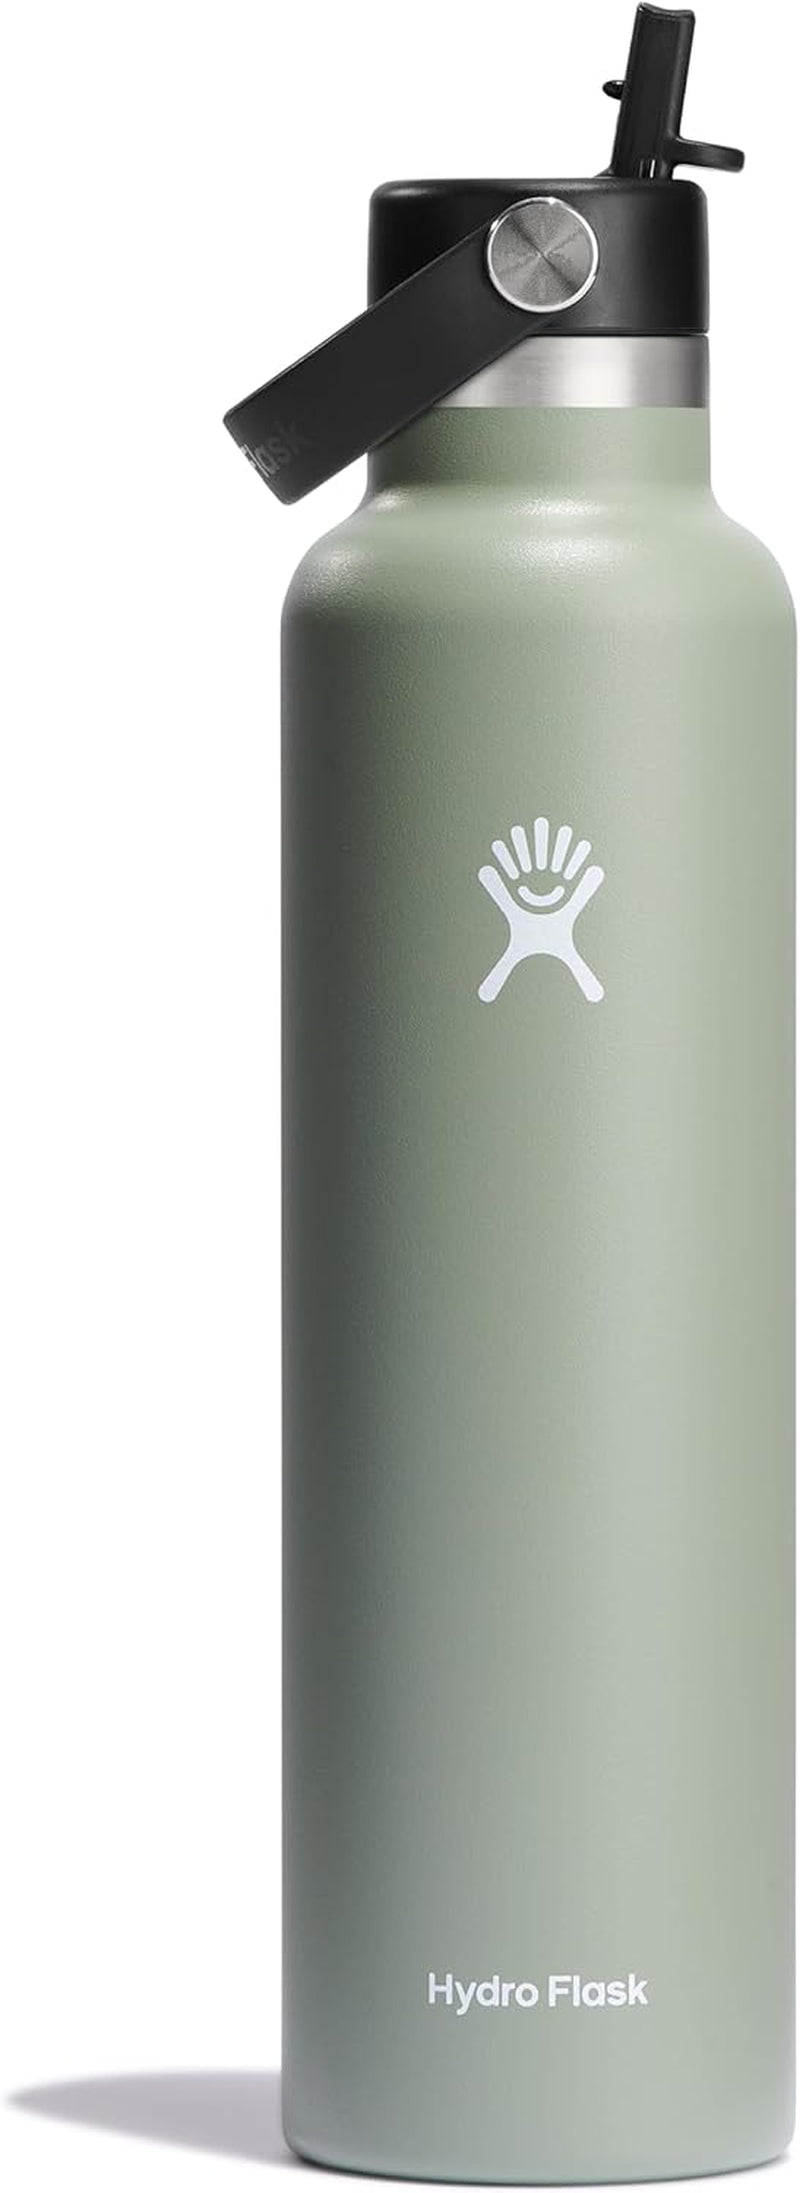 24 Oz Stainless Steel Standard Water Mouth Bottle with Flex Straw Cap and Double-Wall Vacuum Insulation